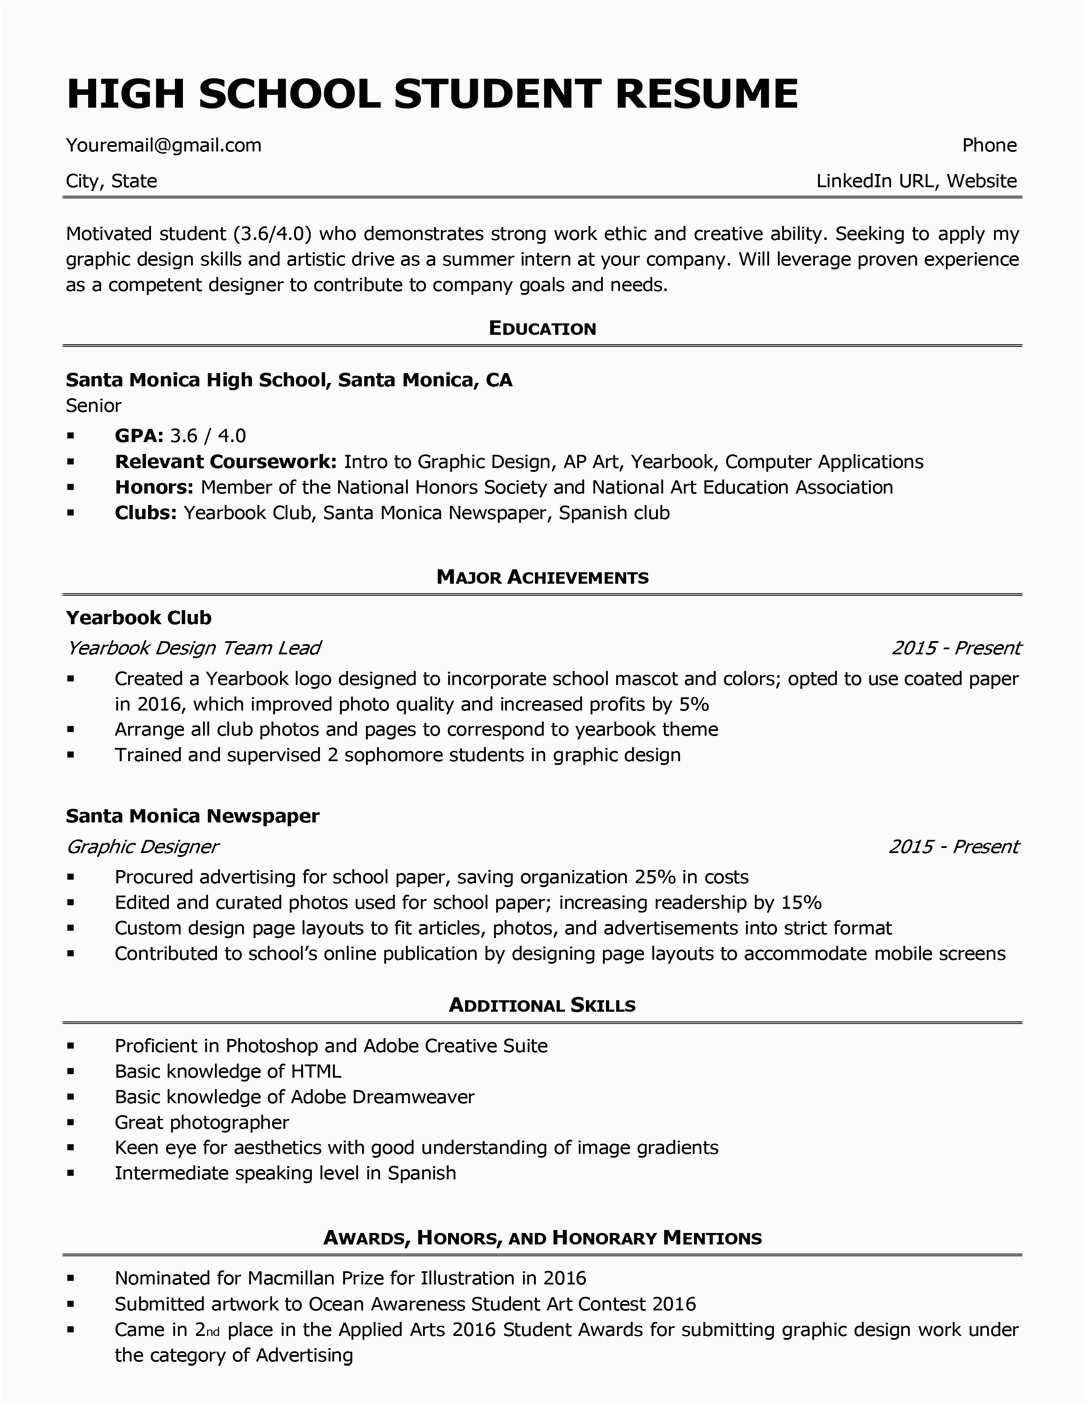 Basic Resume Samples for Highschool Students High School Resume Template & Writing Tips